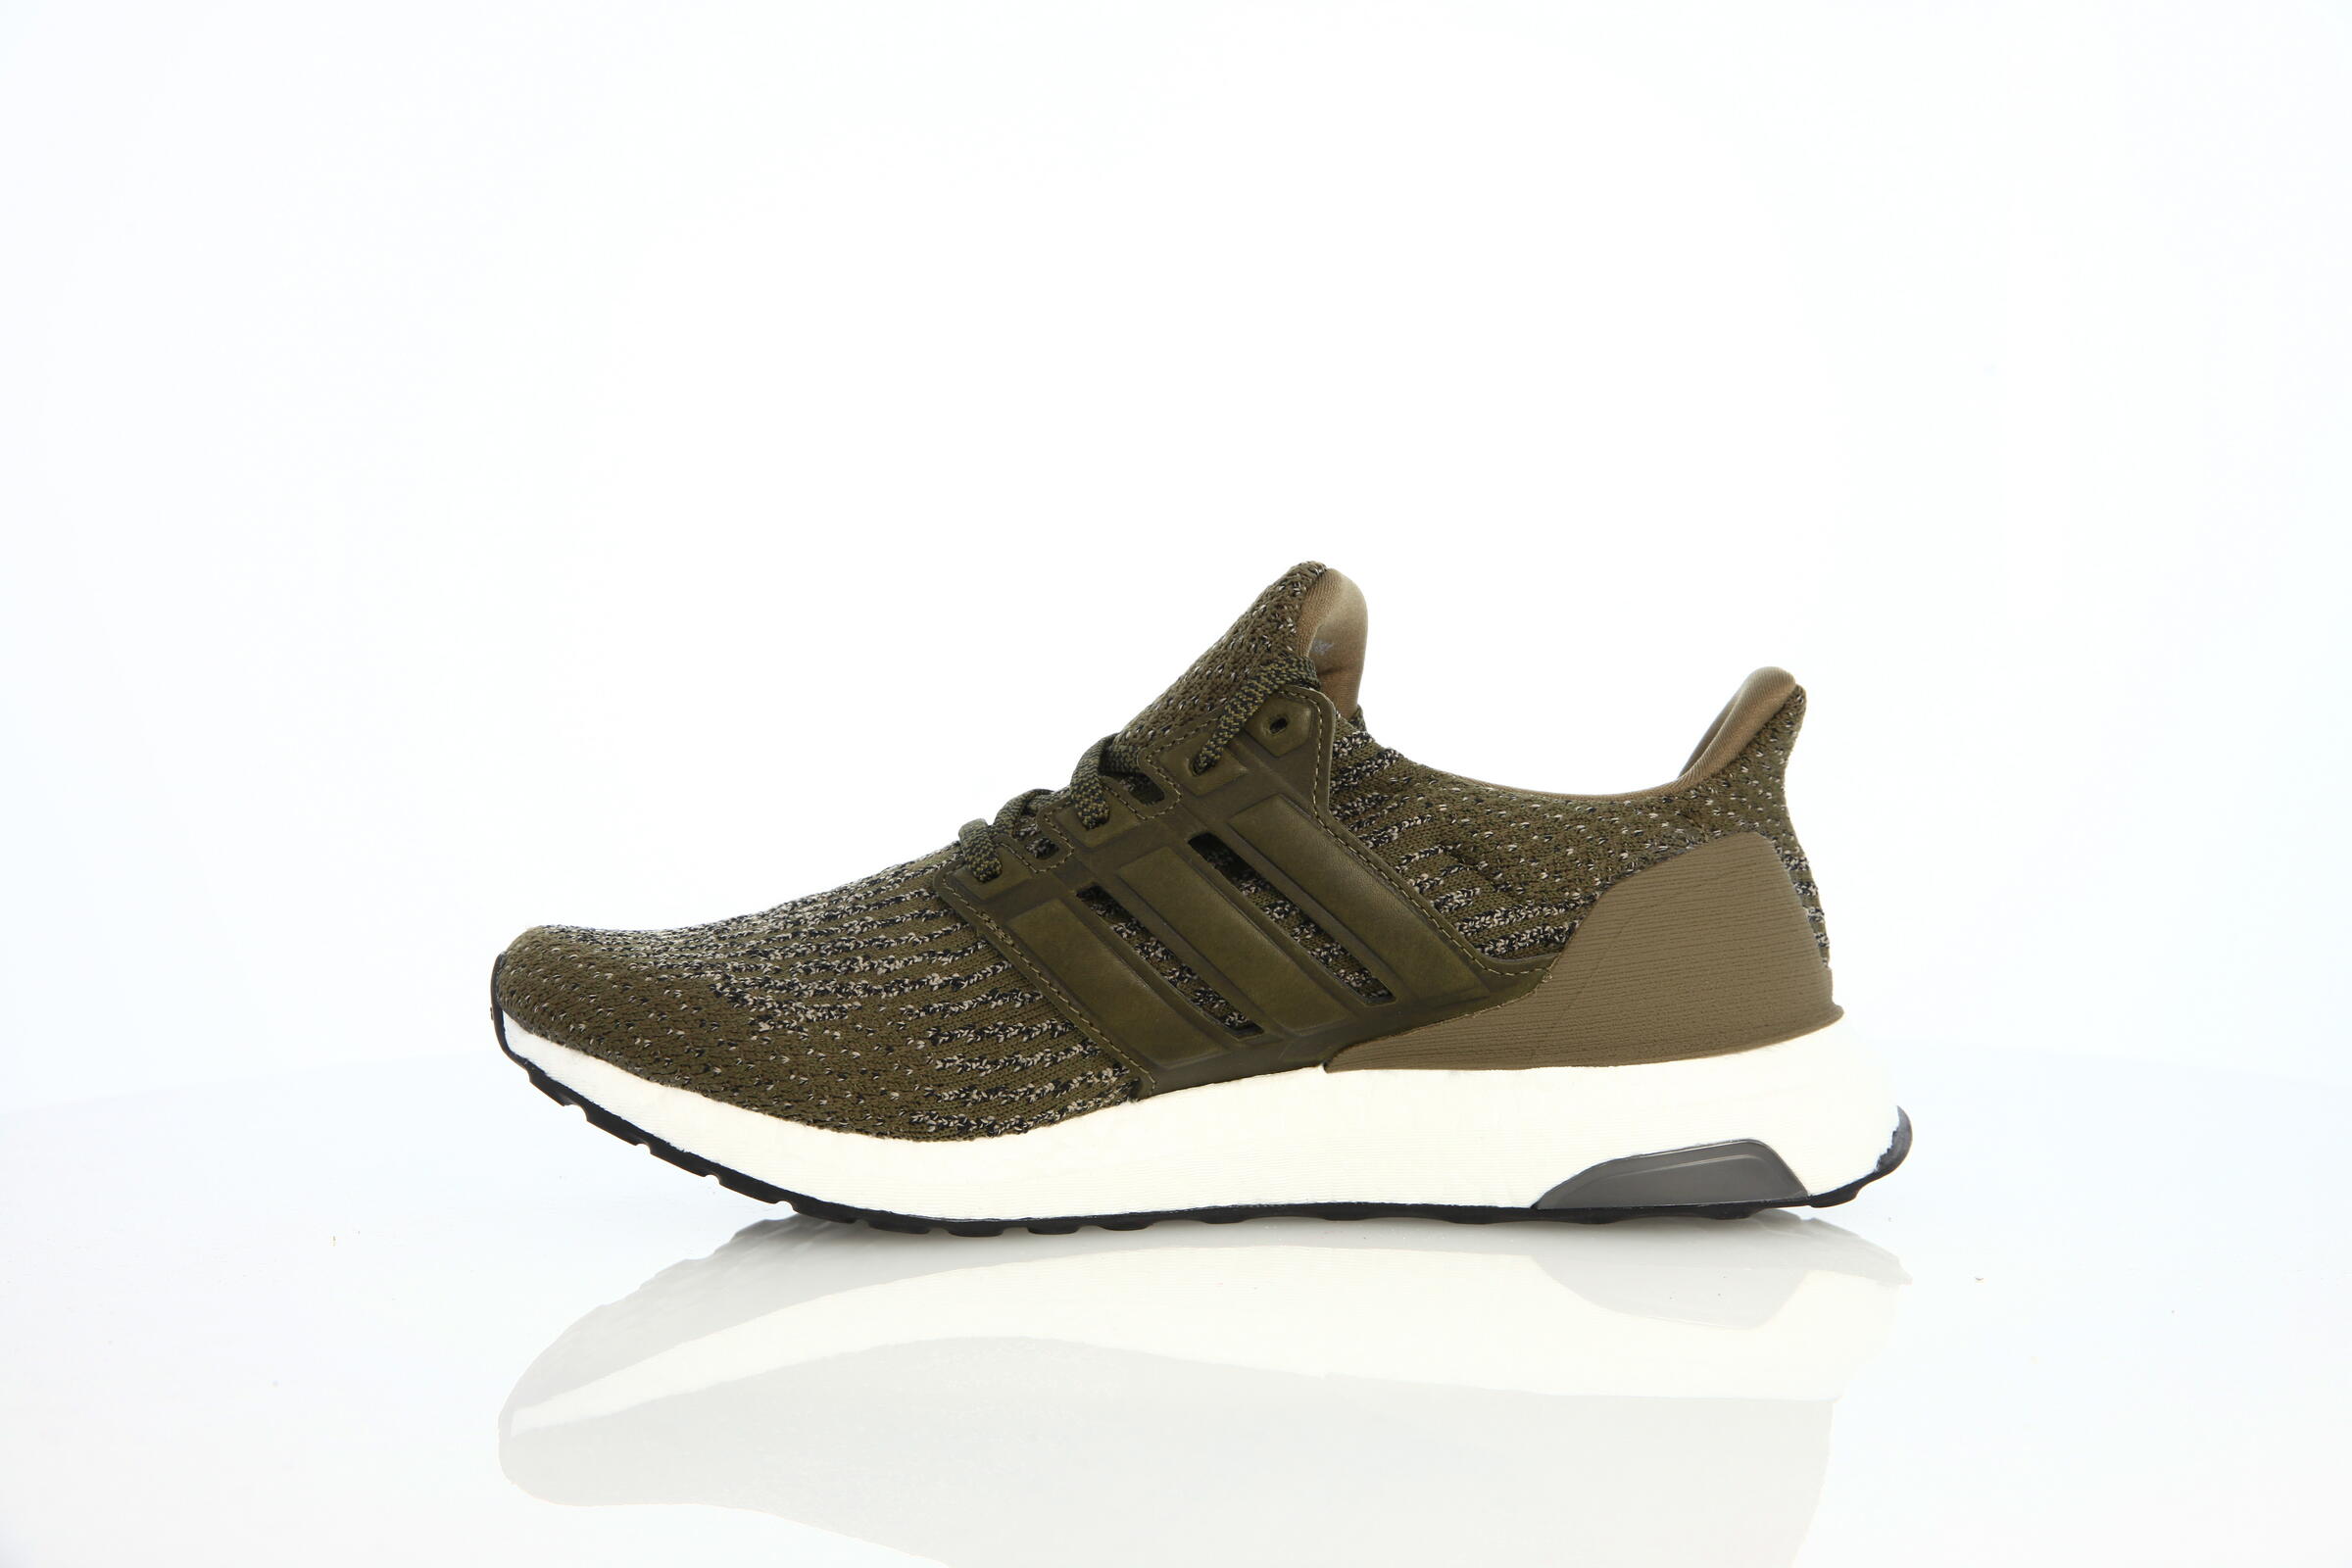 adidas Performance UltraBoost 3.0 "Trace Olive"